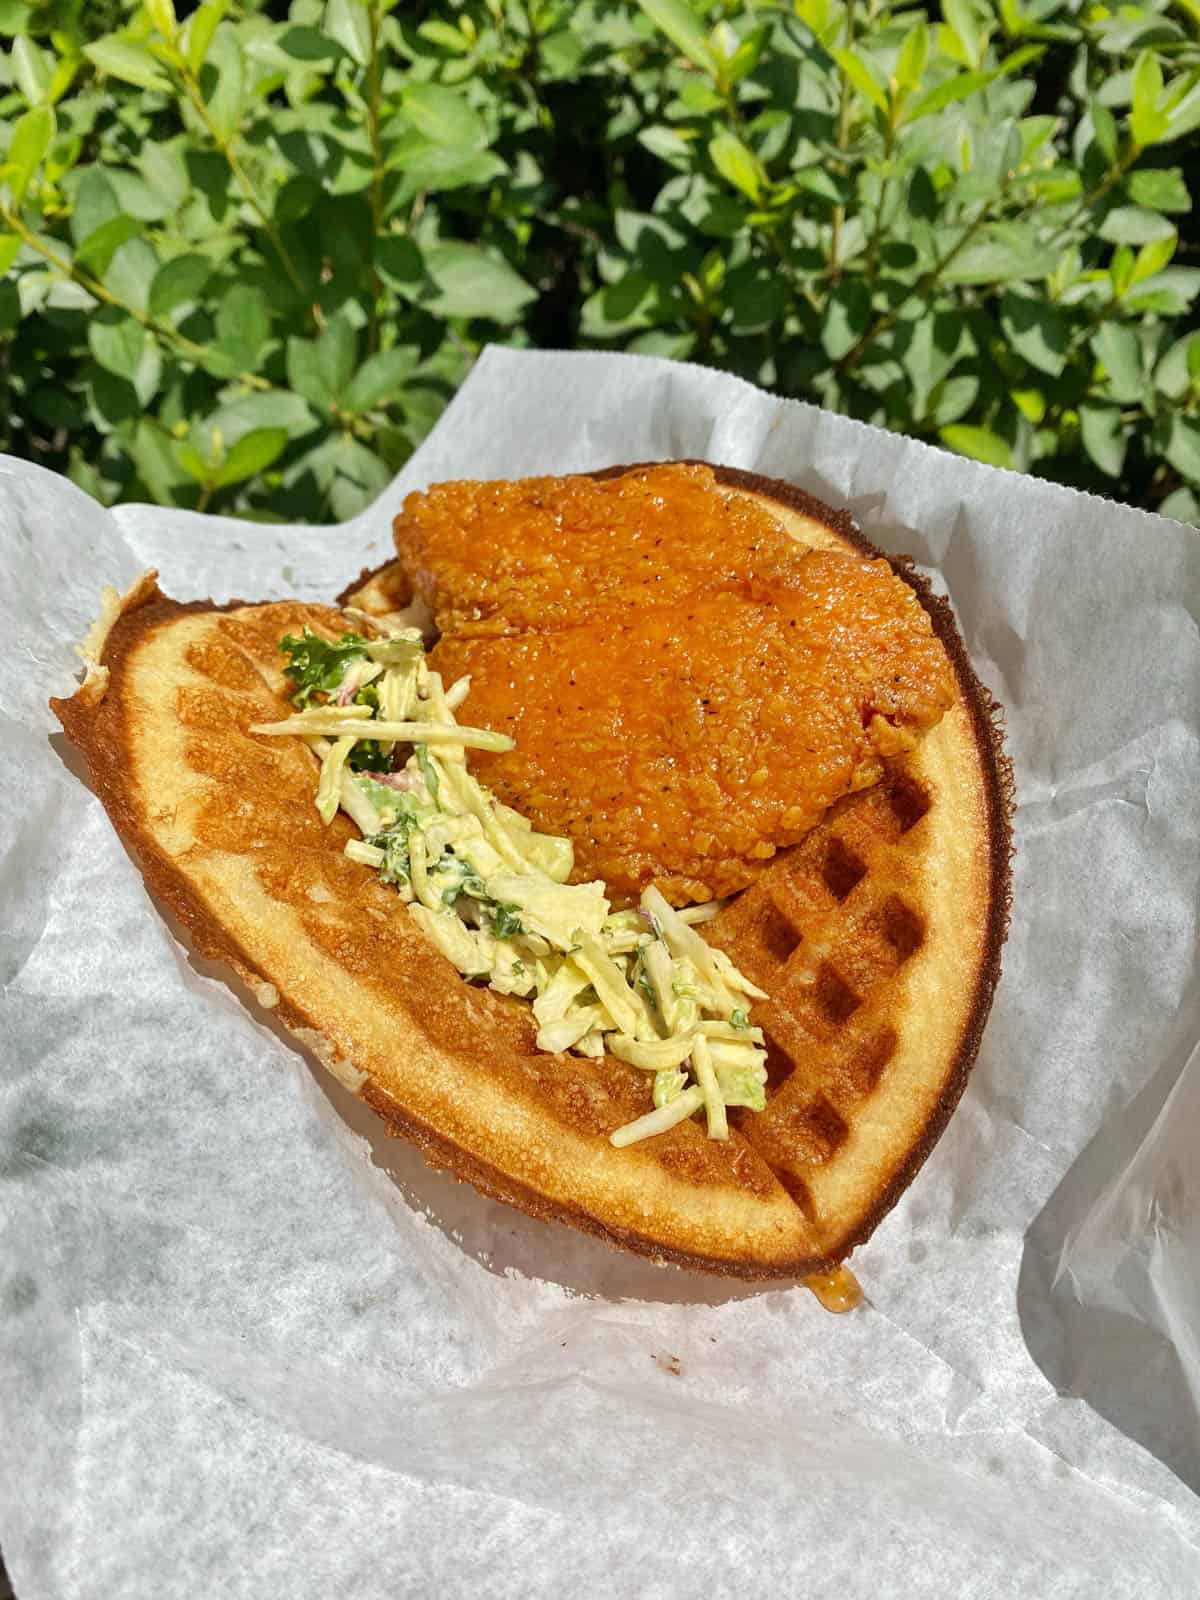 one waffle with coleslaw and fried chicken on top